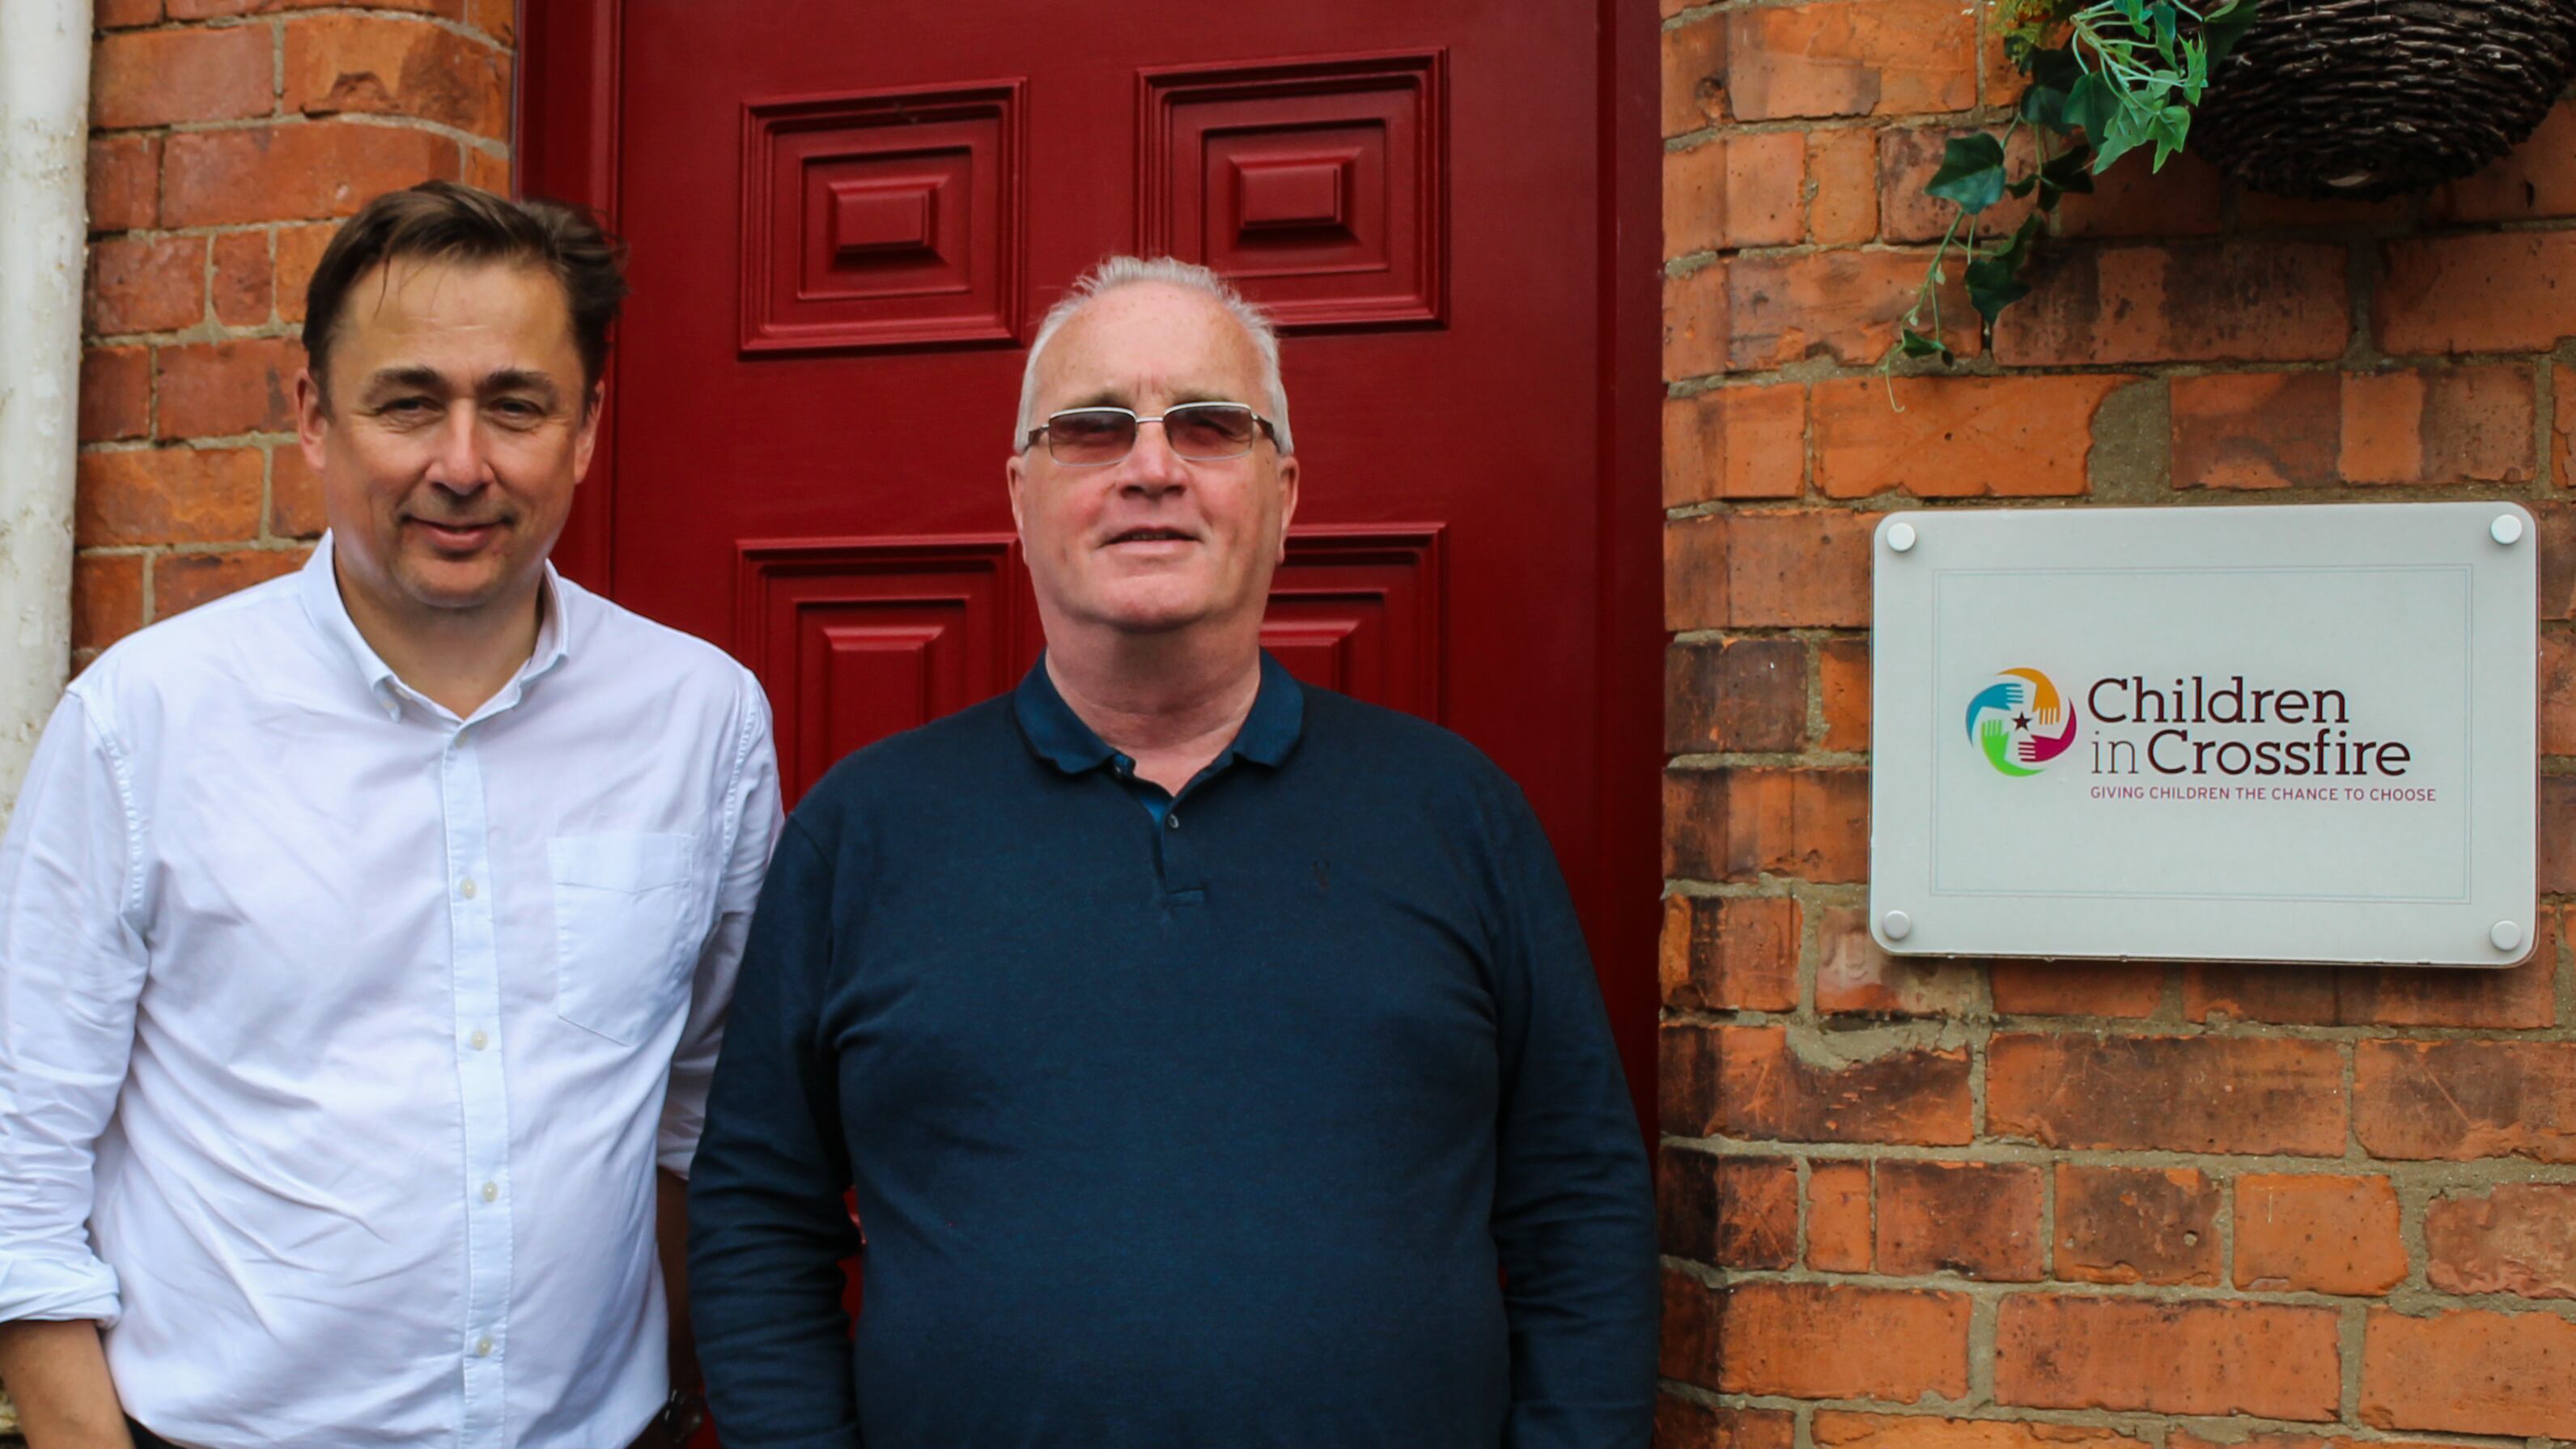 John Hume Junior, pictured with Children in Crossfire founder, Richard Moore (right), will cycle from Paris to Nice in September to raise money for the charity.